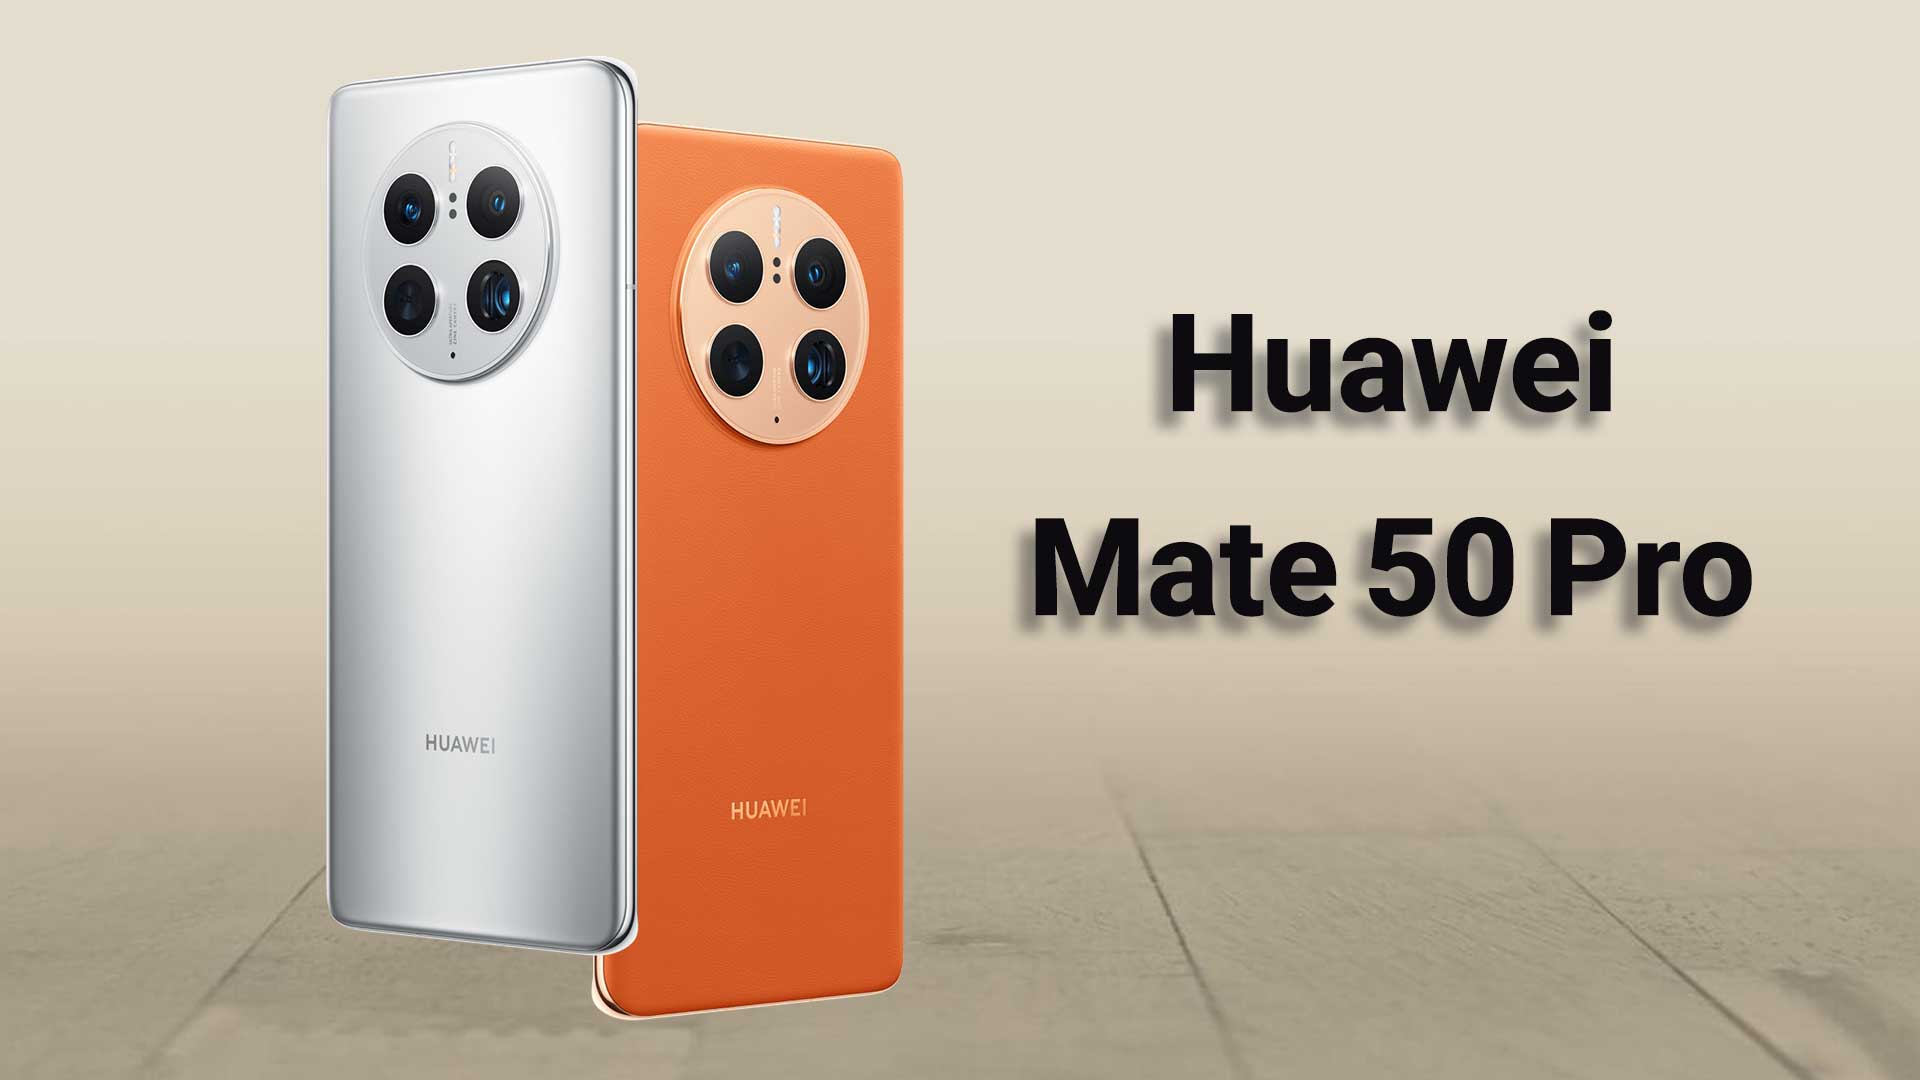 Huawei-Mate-50-Pro-is-the-new-king-of-camera-phones-on-DxOMark